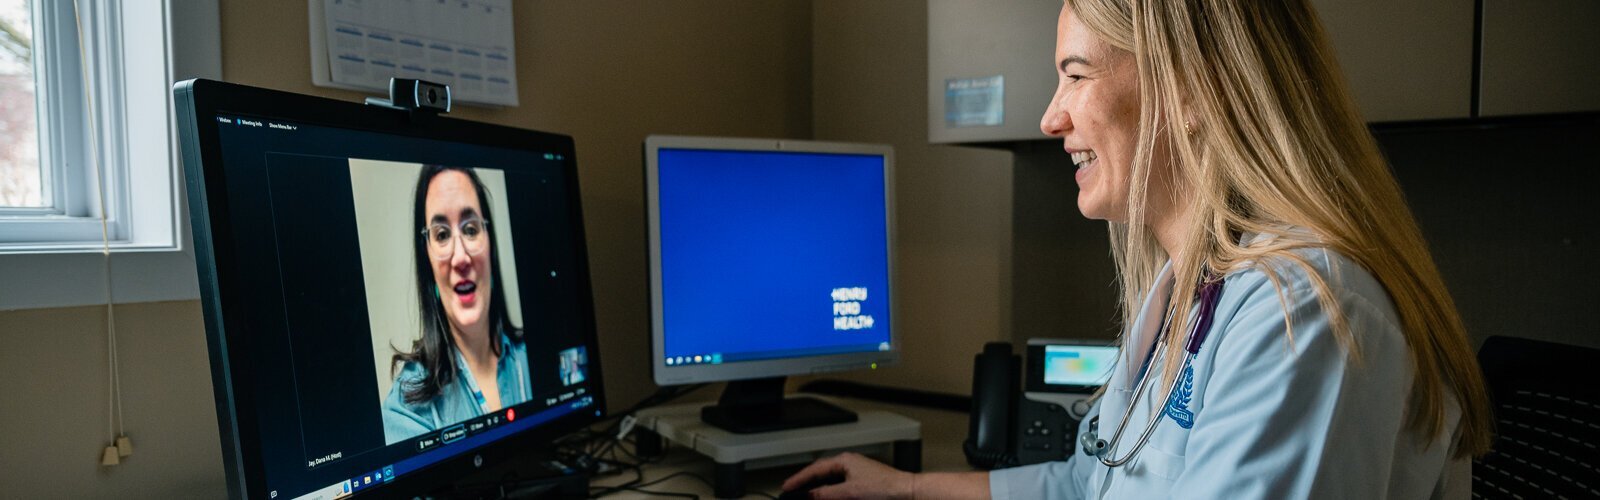 Dr. Jennifer Burgess, seen here using a telehealth platform, is one of several Henry Ford Health practitioners working to improve the telehealth experience for patients.